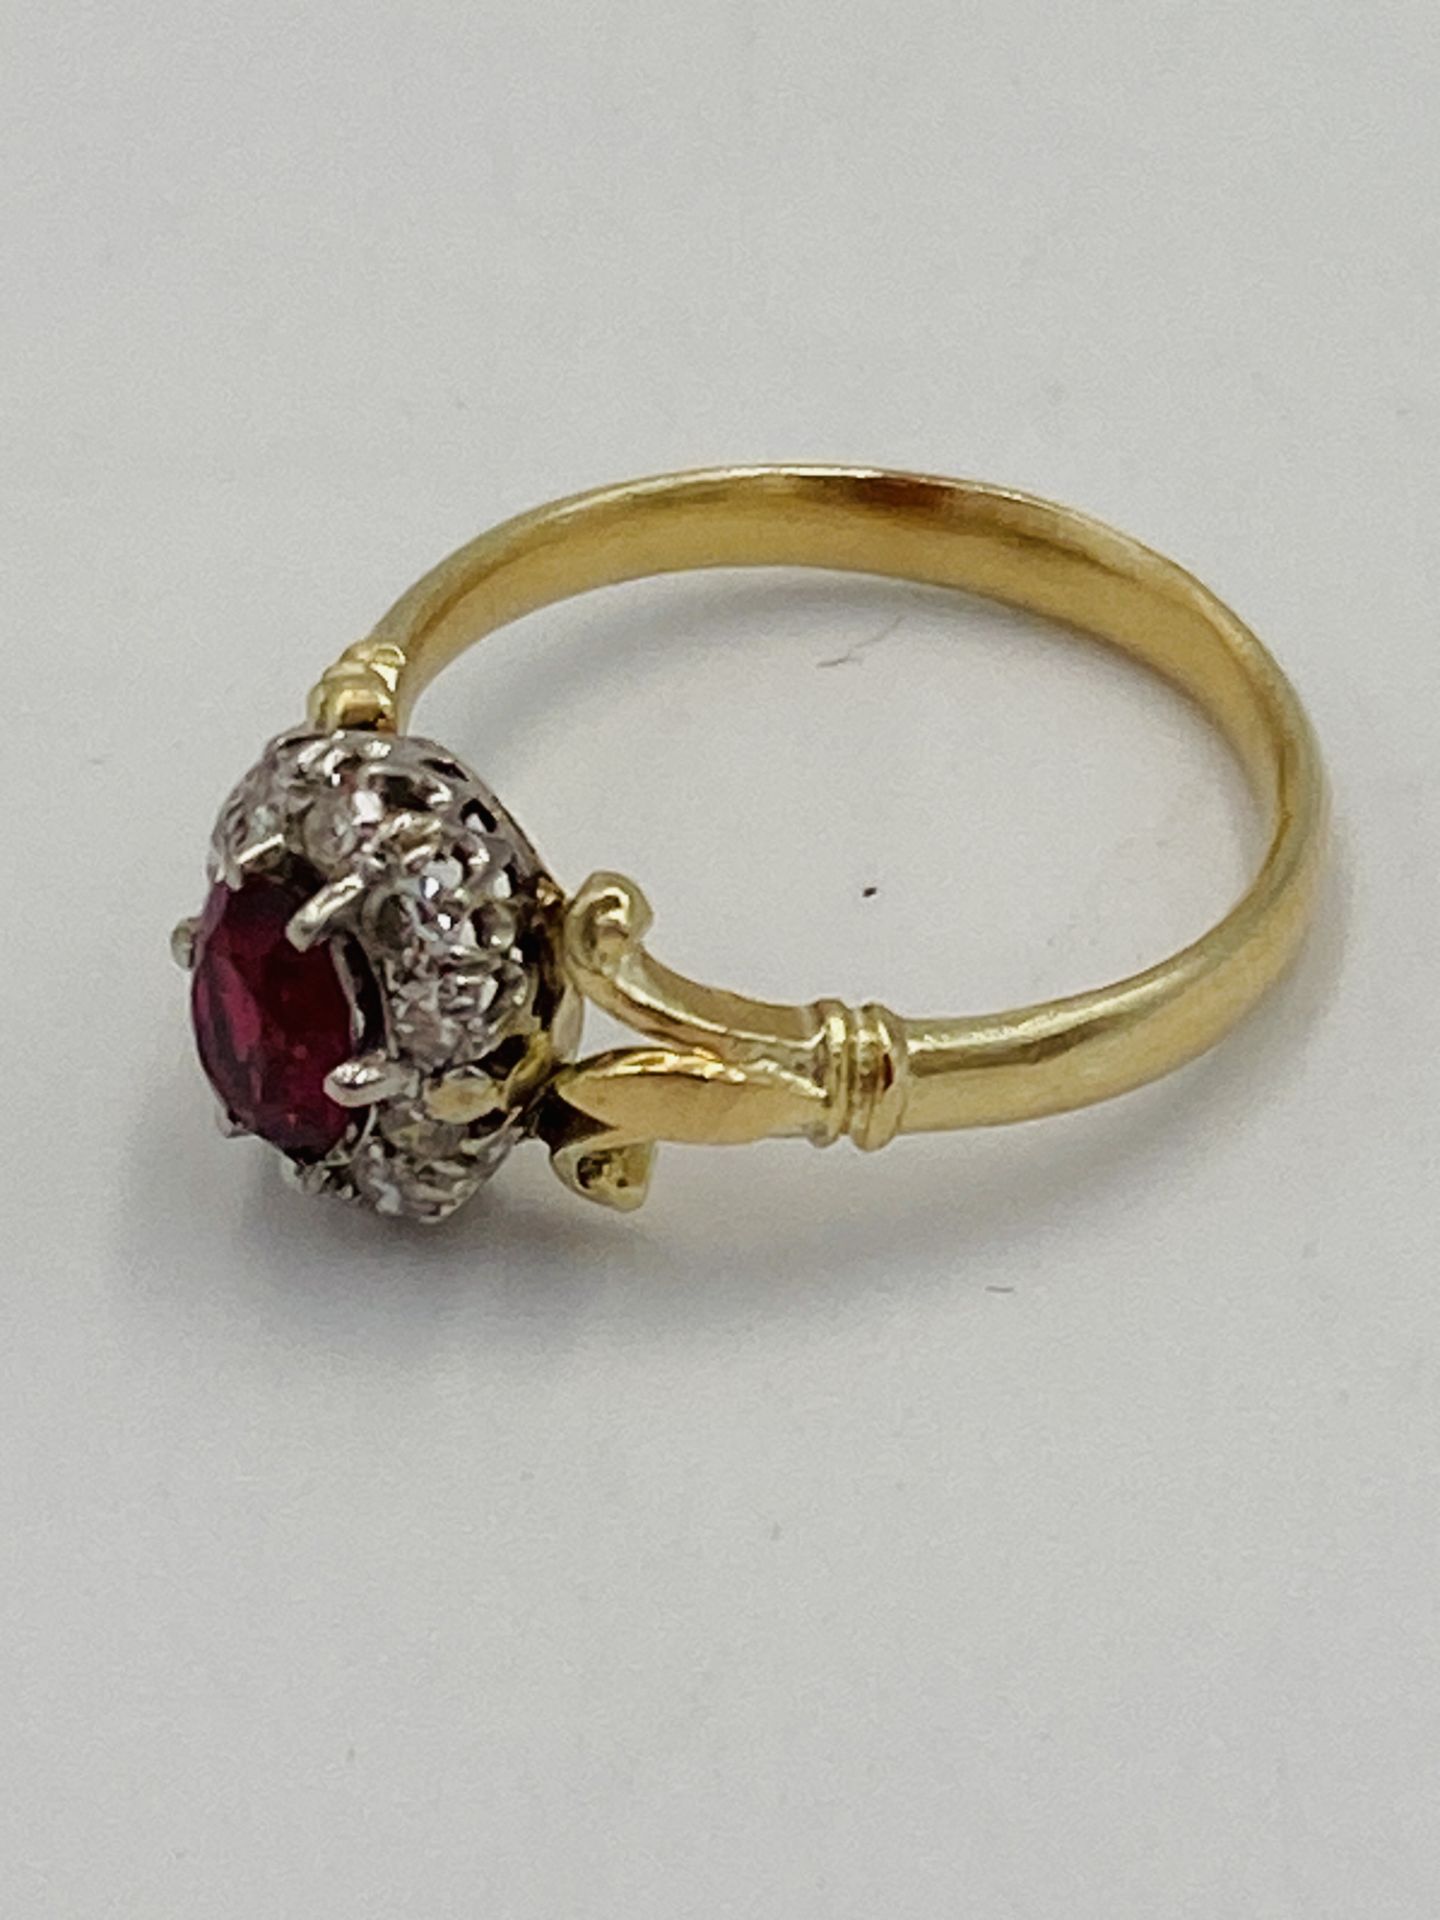 Gold ring set with central ruby and diamond surround - Image 3 of 6